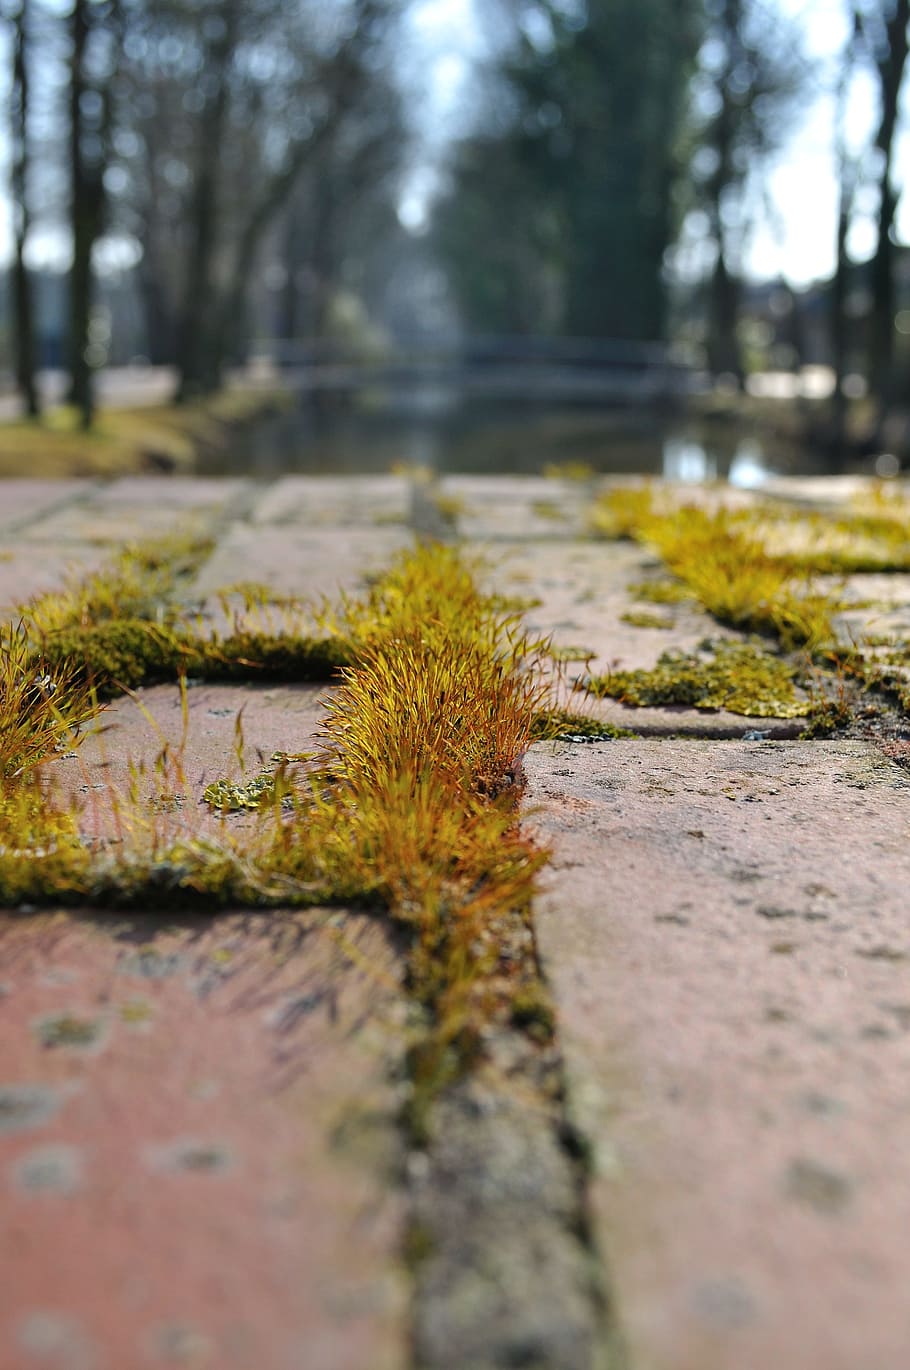 paved, away, moss, tufts of grass, fouling, plant, tree, selective focus, nature, day